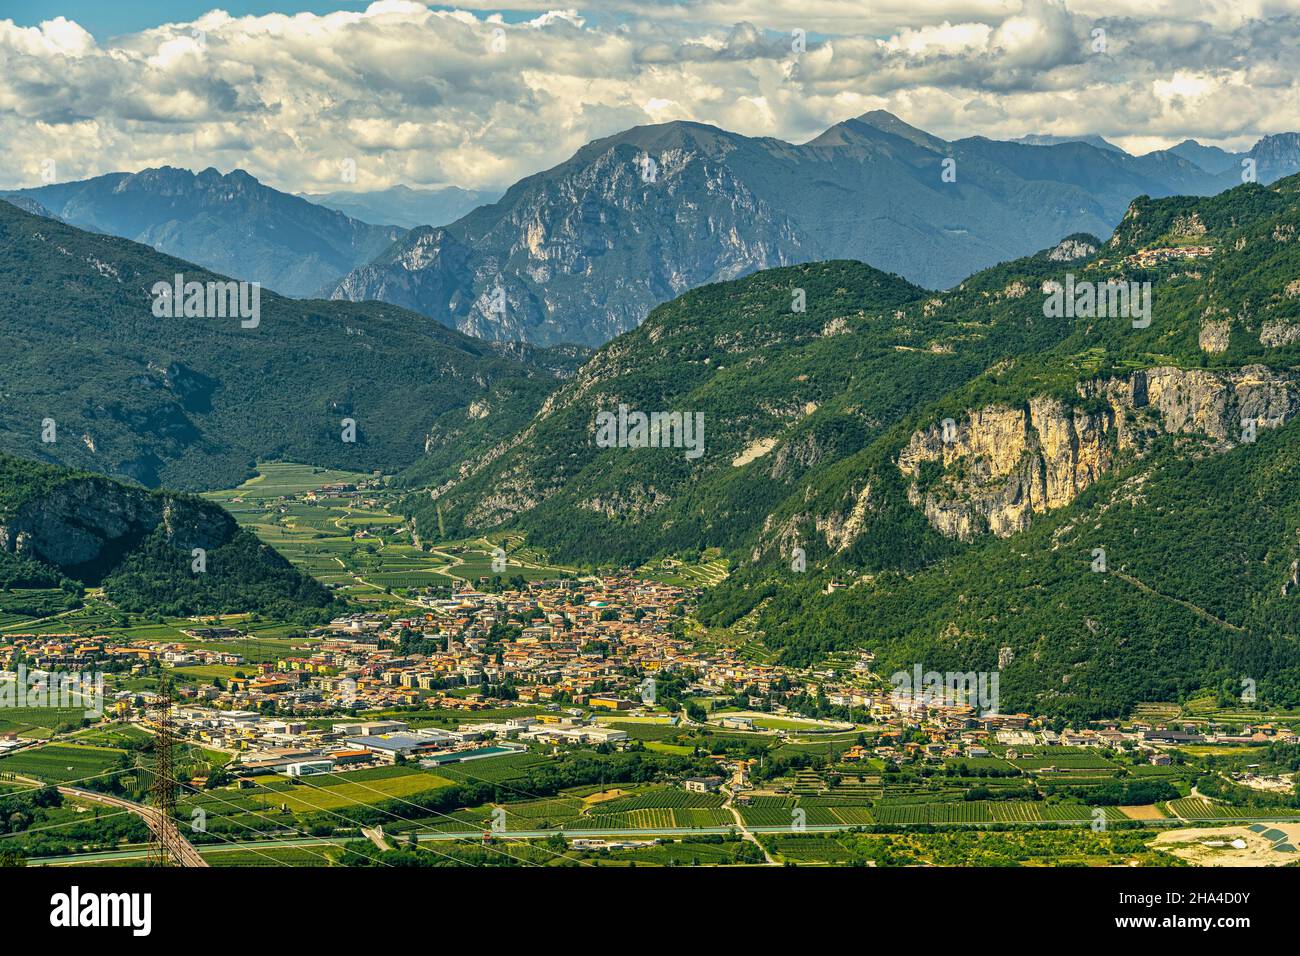 The municipality of Mori occupies the southern part of Vallagarina, the last stretch in the mountains of the valley crossed by the Adige river. Mori Stock Photo